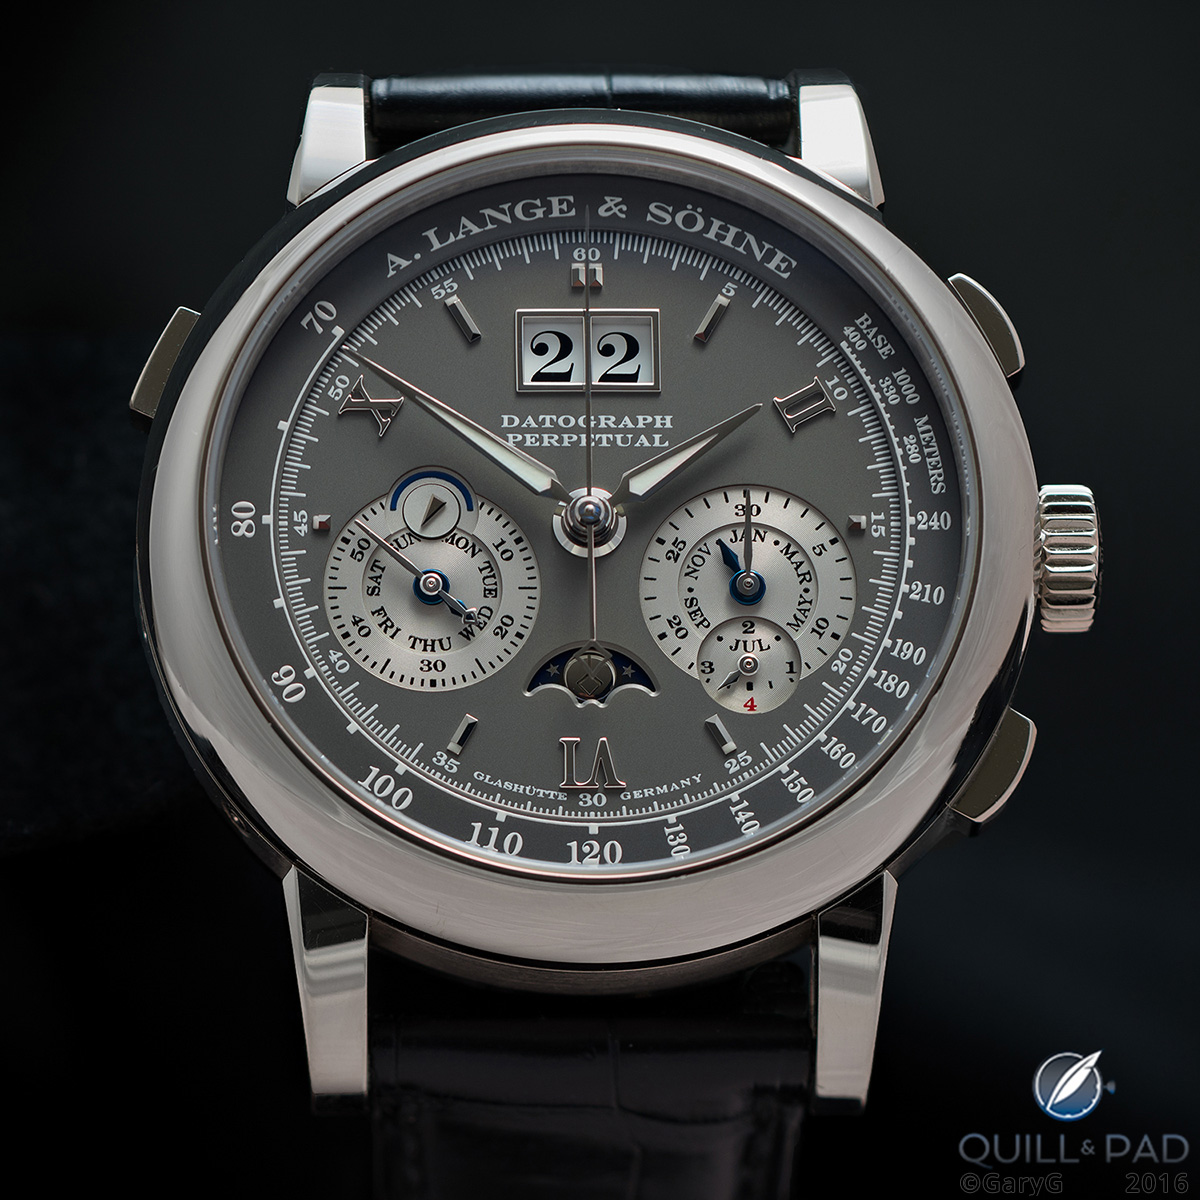 Calling your name? The A. Lange & Söhne Datograph Perpetual